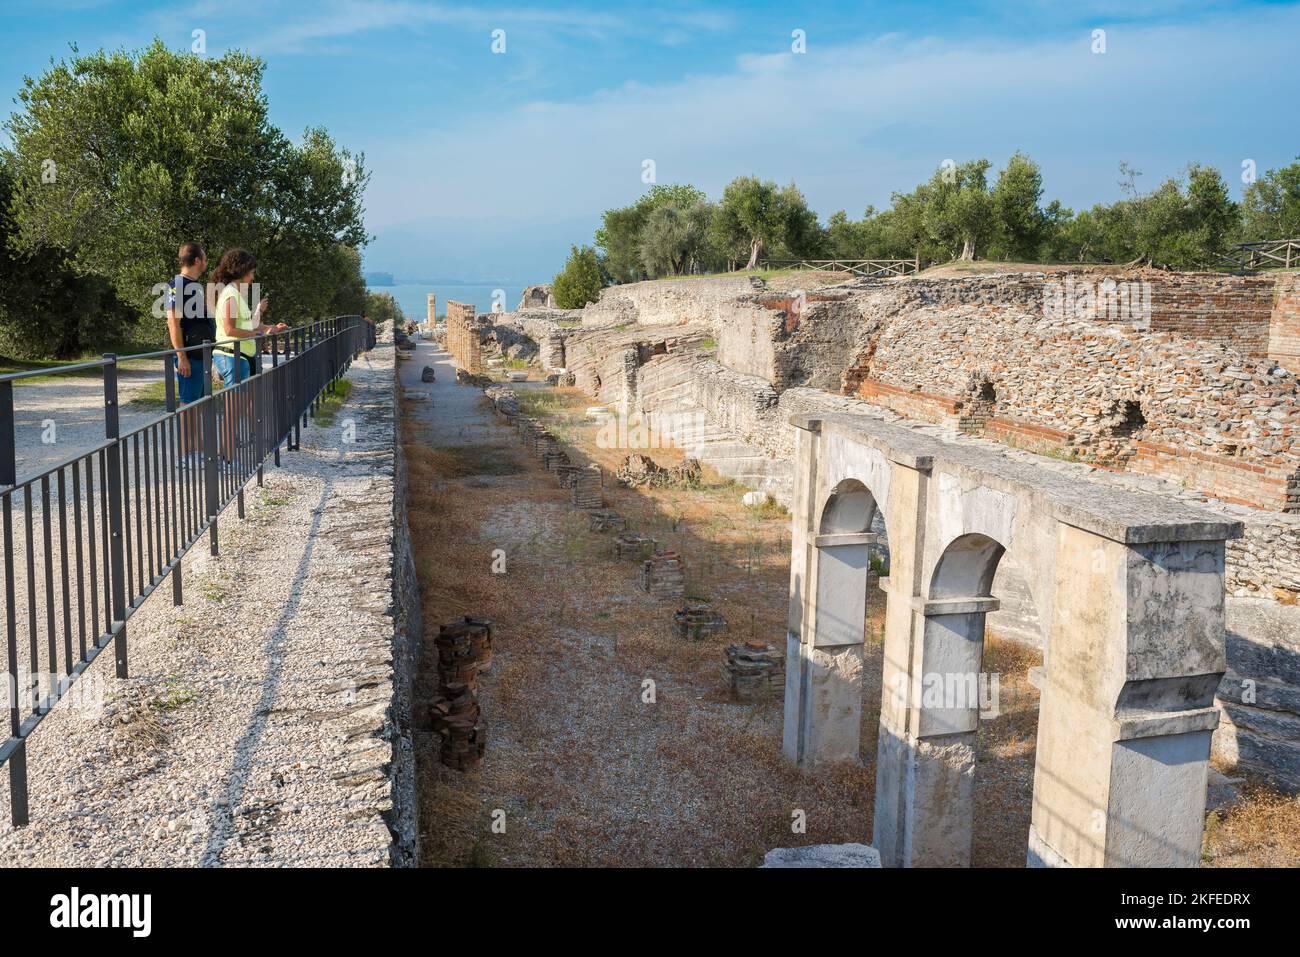 Grotte di Catullo Sirmione, view of people looking at the ruins of an ancient Roman villa believed to be the house of Catullus, Lake Garda, Italy Stock Photo